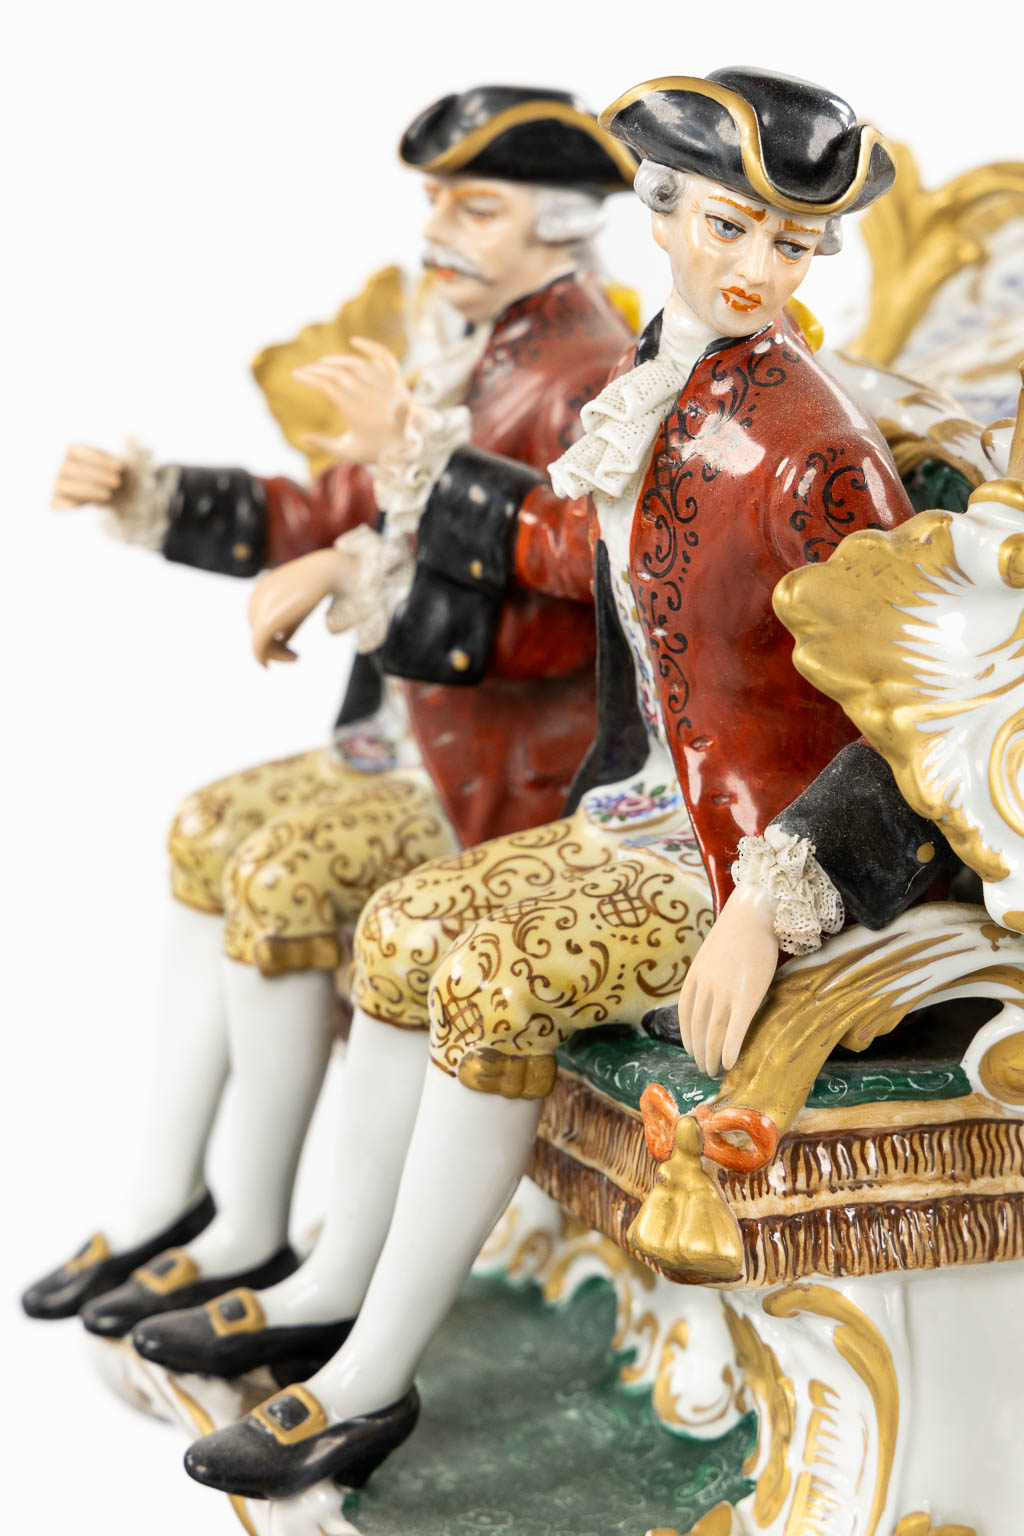 Capodimonte, an exceptionally large horse-drawn carriage, polychrome porcelain. (L:90 x W:40 x H:54 cm)